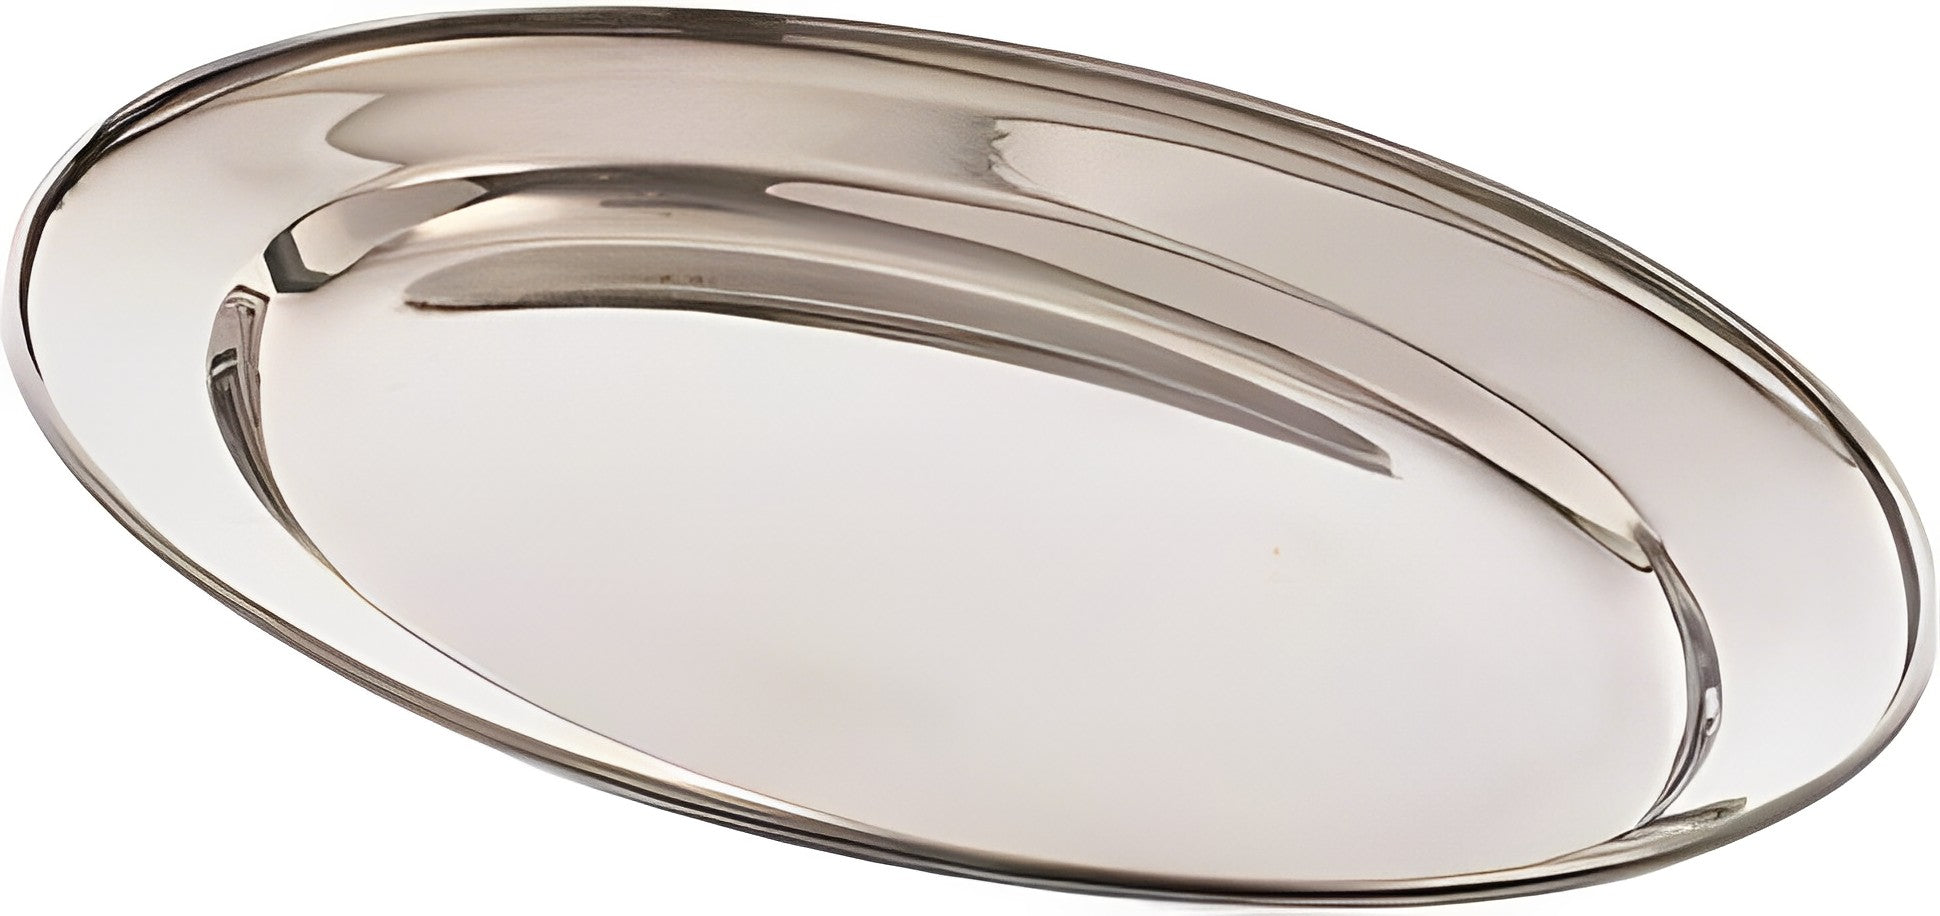 Browne - 10" Stainless Steel Oval Platter - 574180